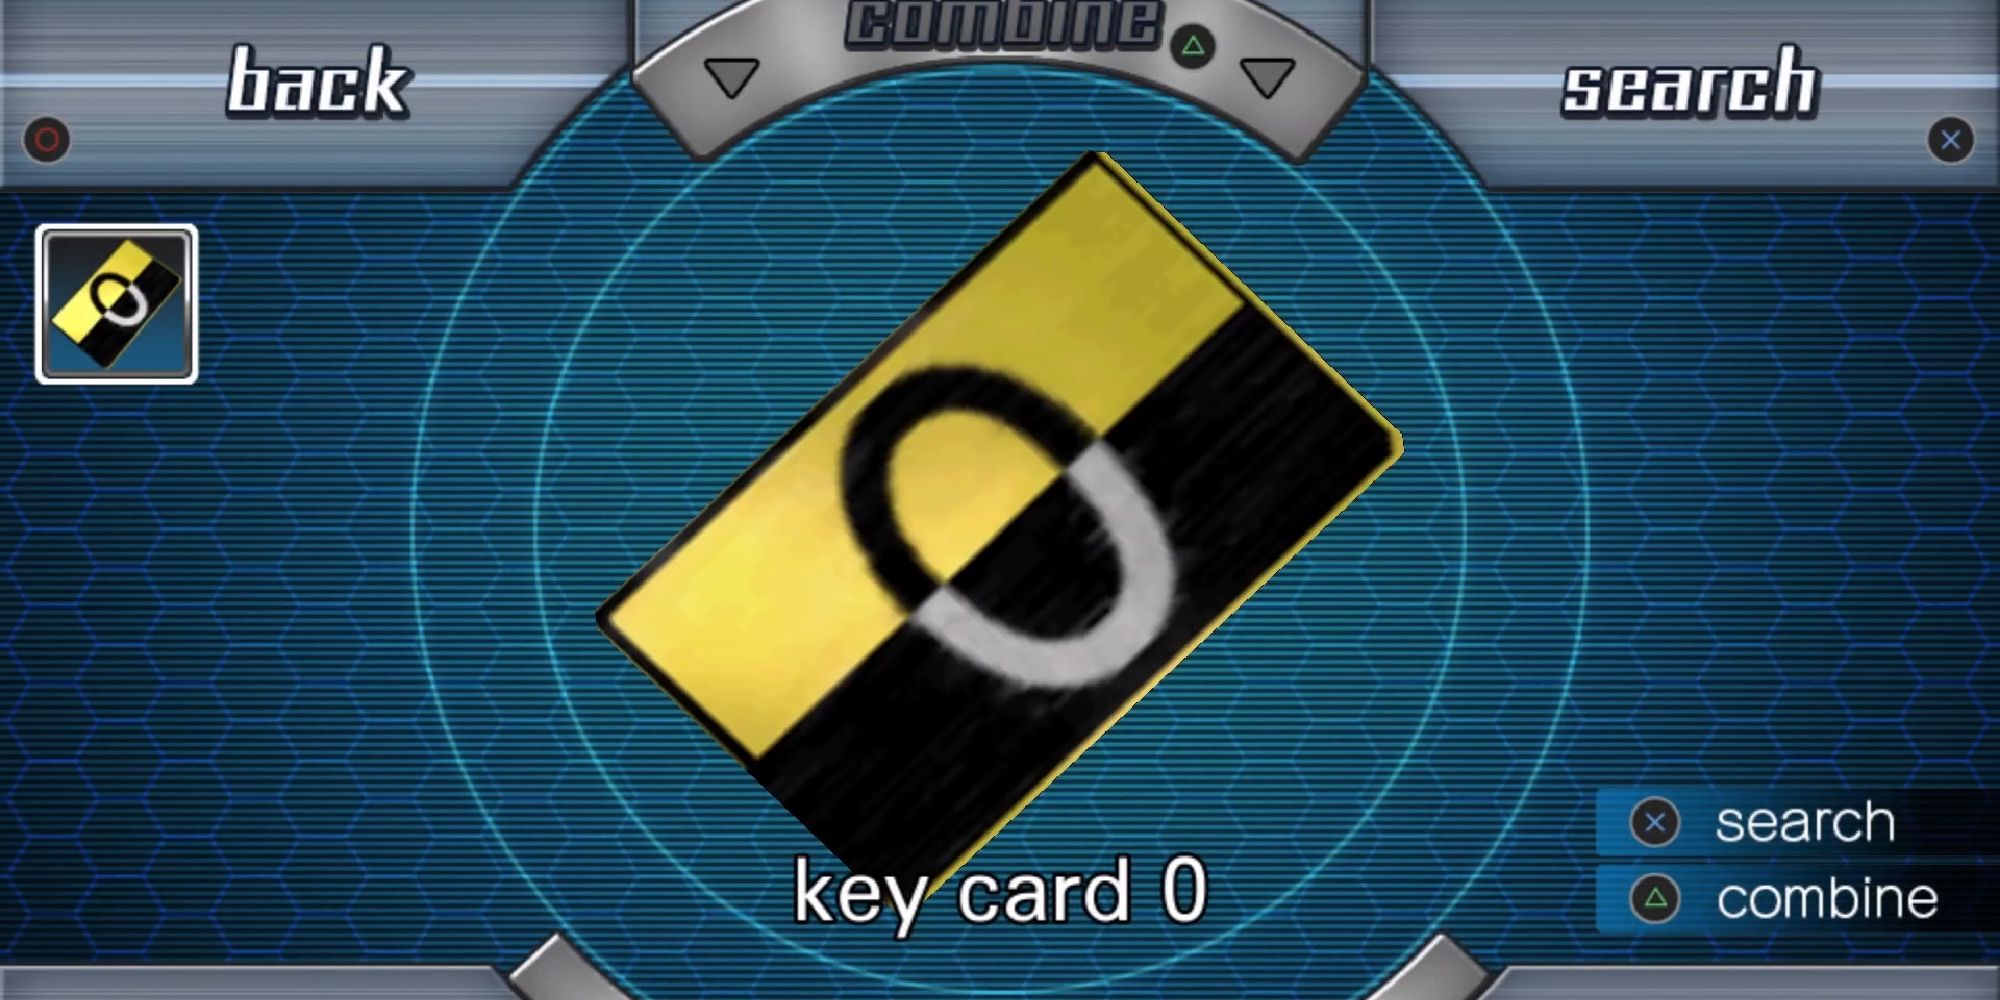 inventory displaying key card 0 to leave study